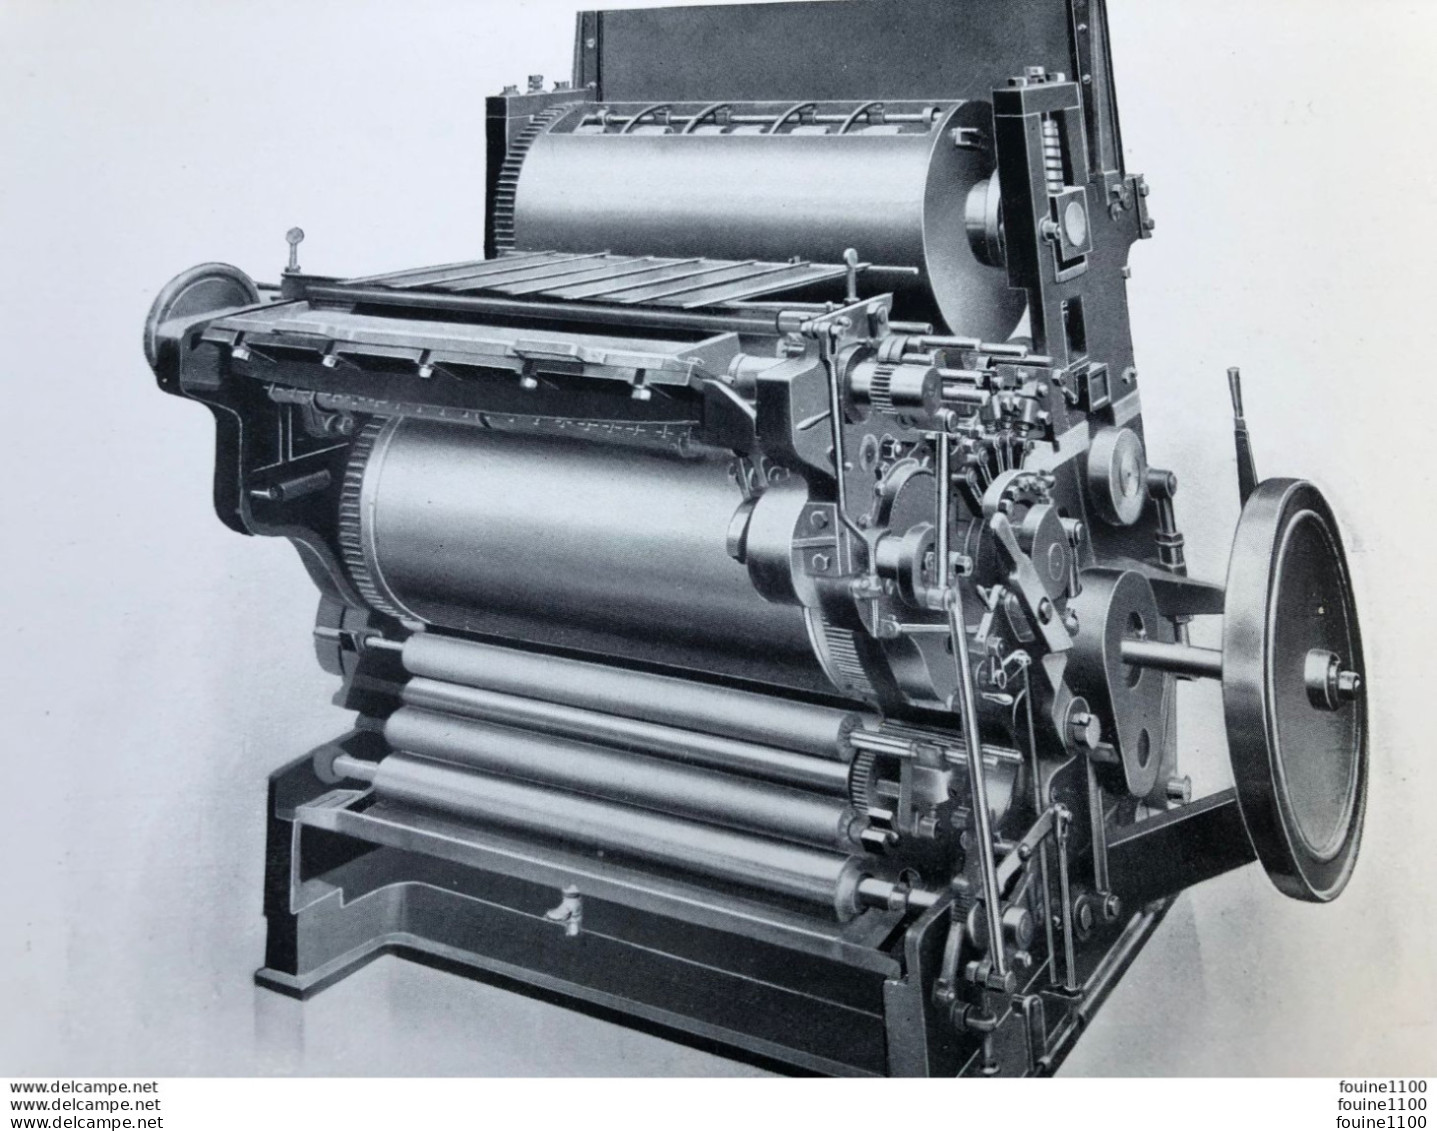 catalogue MACHINES D'IMPRIMERIE PRESSES ROTATIVES TYPOGRAPHIQUES Georges MANN & Co LEEDS machinery lithographic rotary